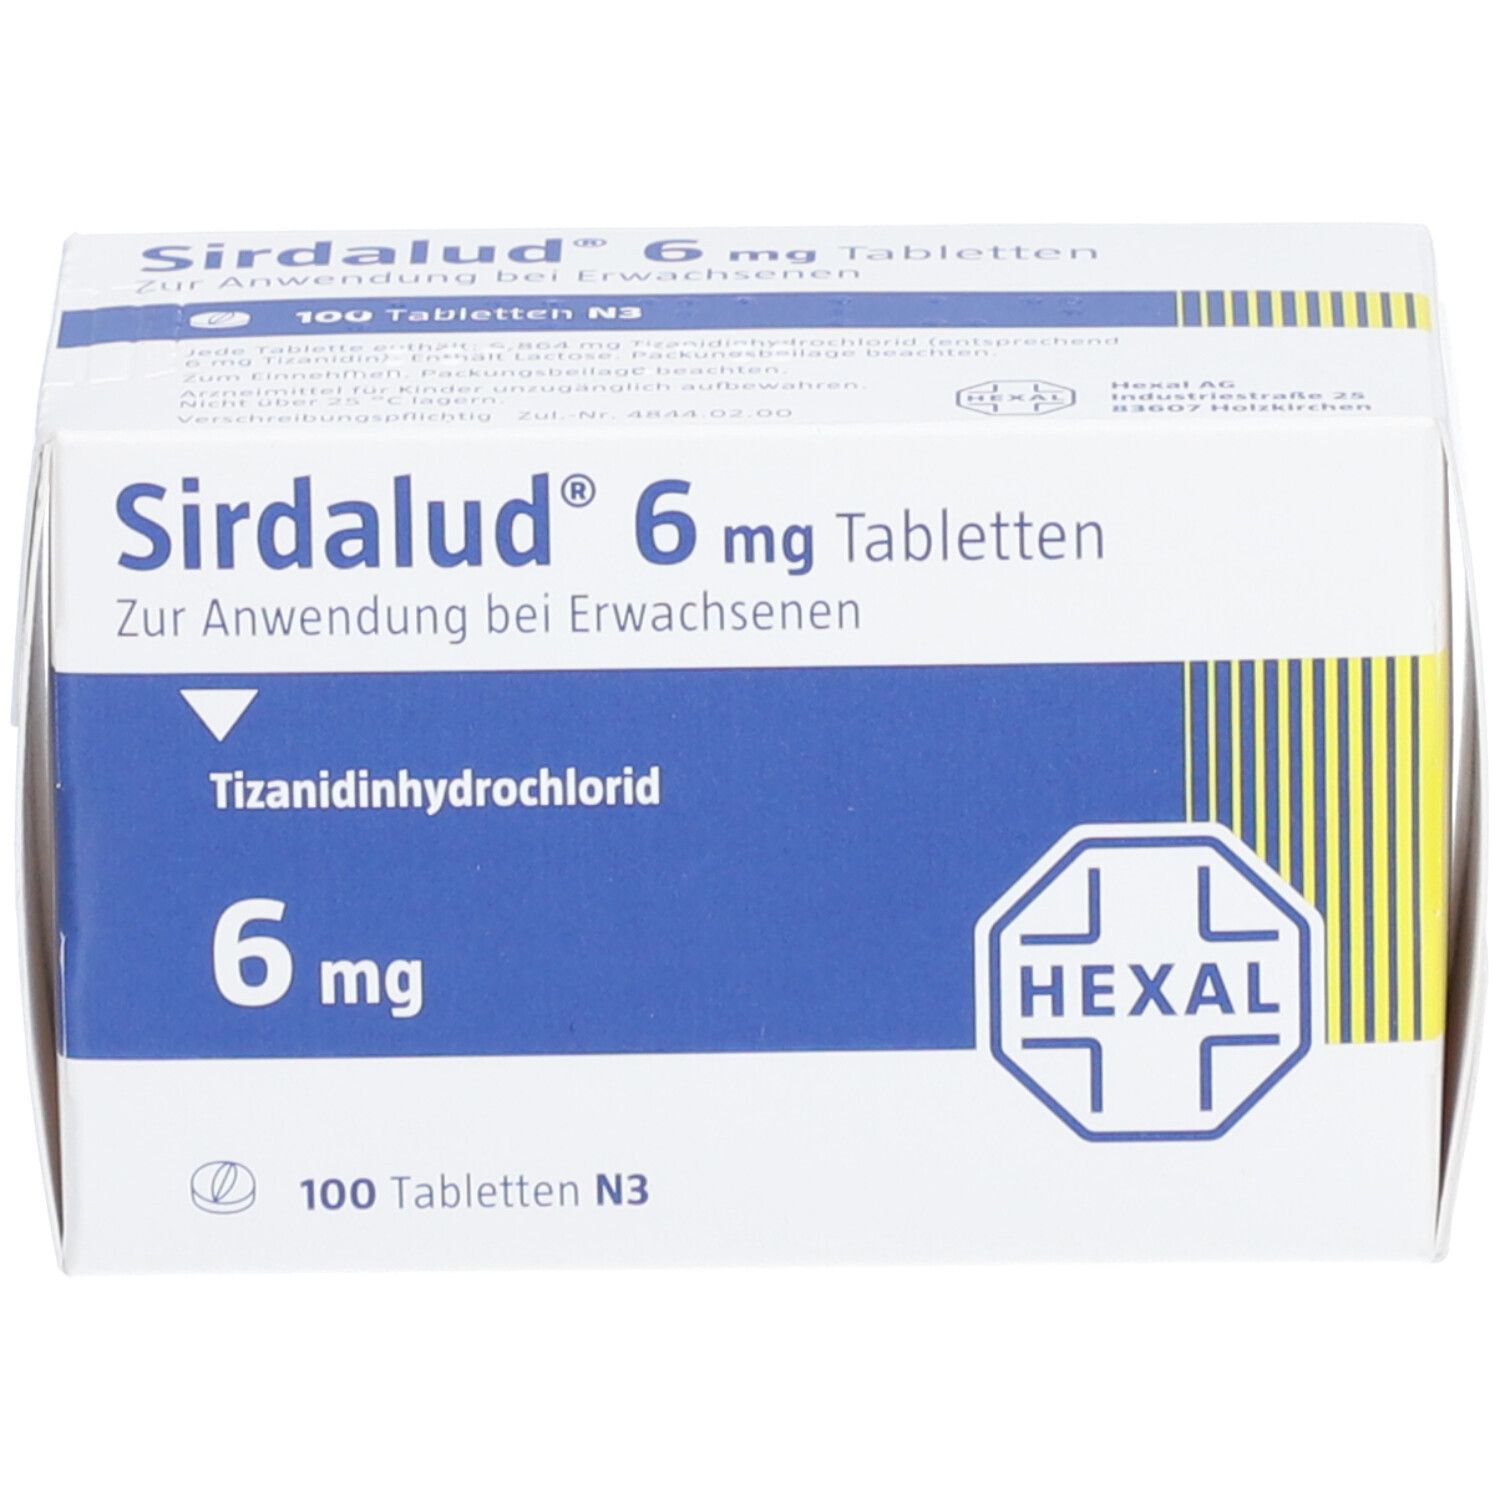 Sirdalud® 6 mg